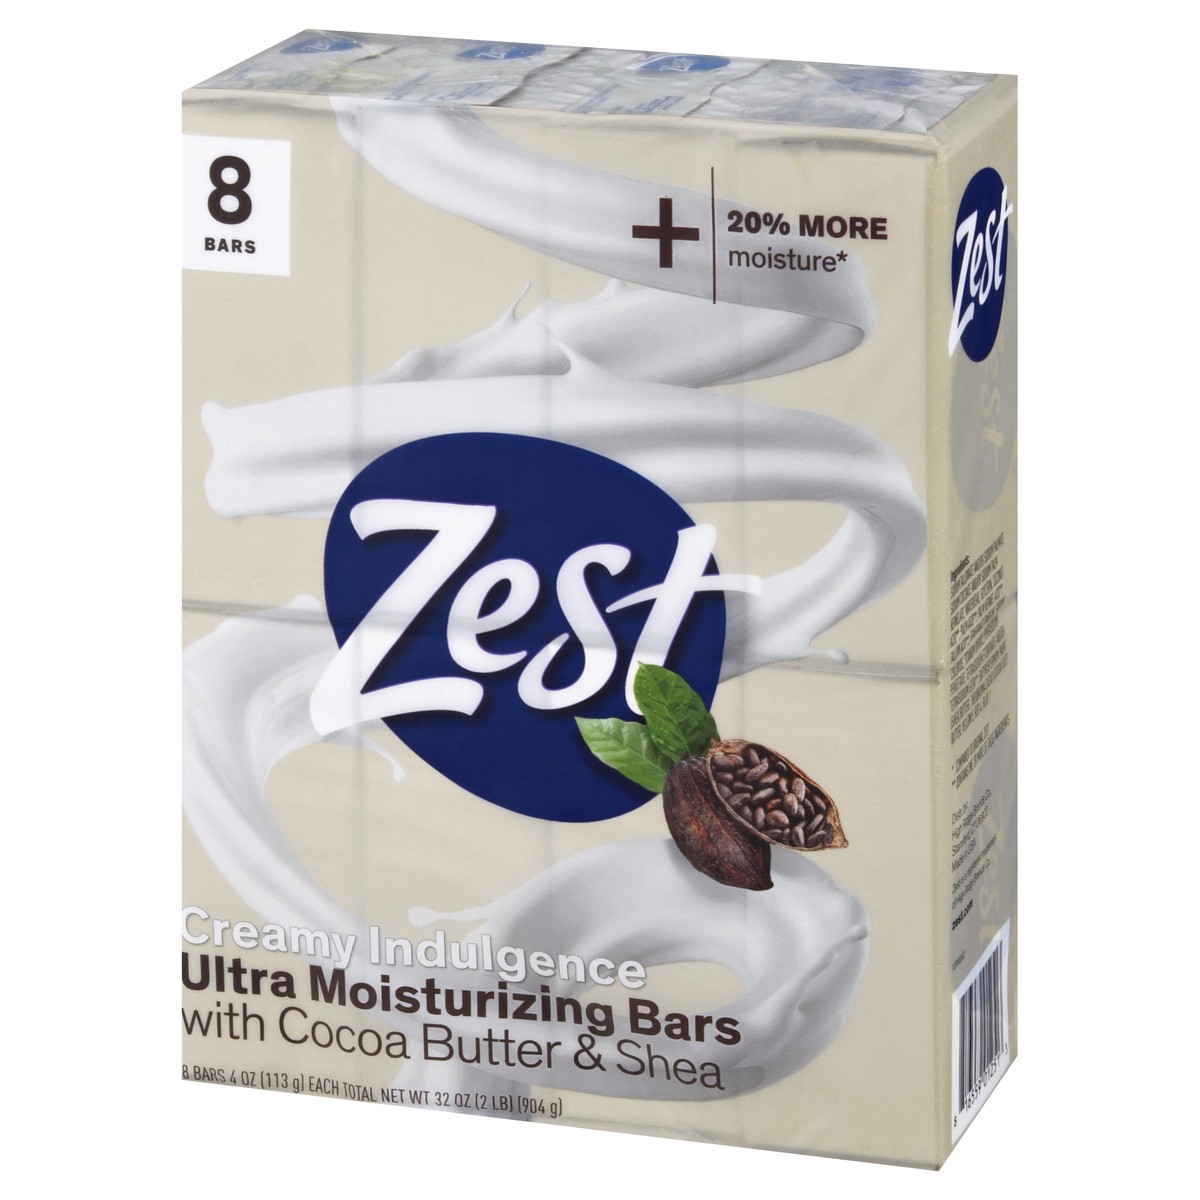 slide 8 of 13, Zest 8 Pack with Cocoa Butter & Shea Ultra Moisturizing Bars 8 ea, 8 ct